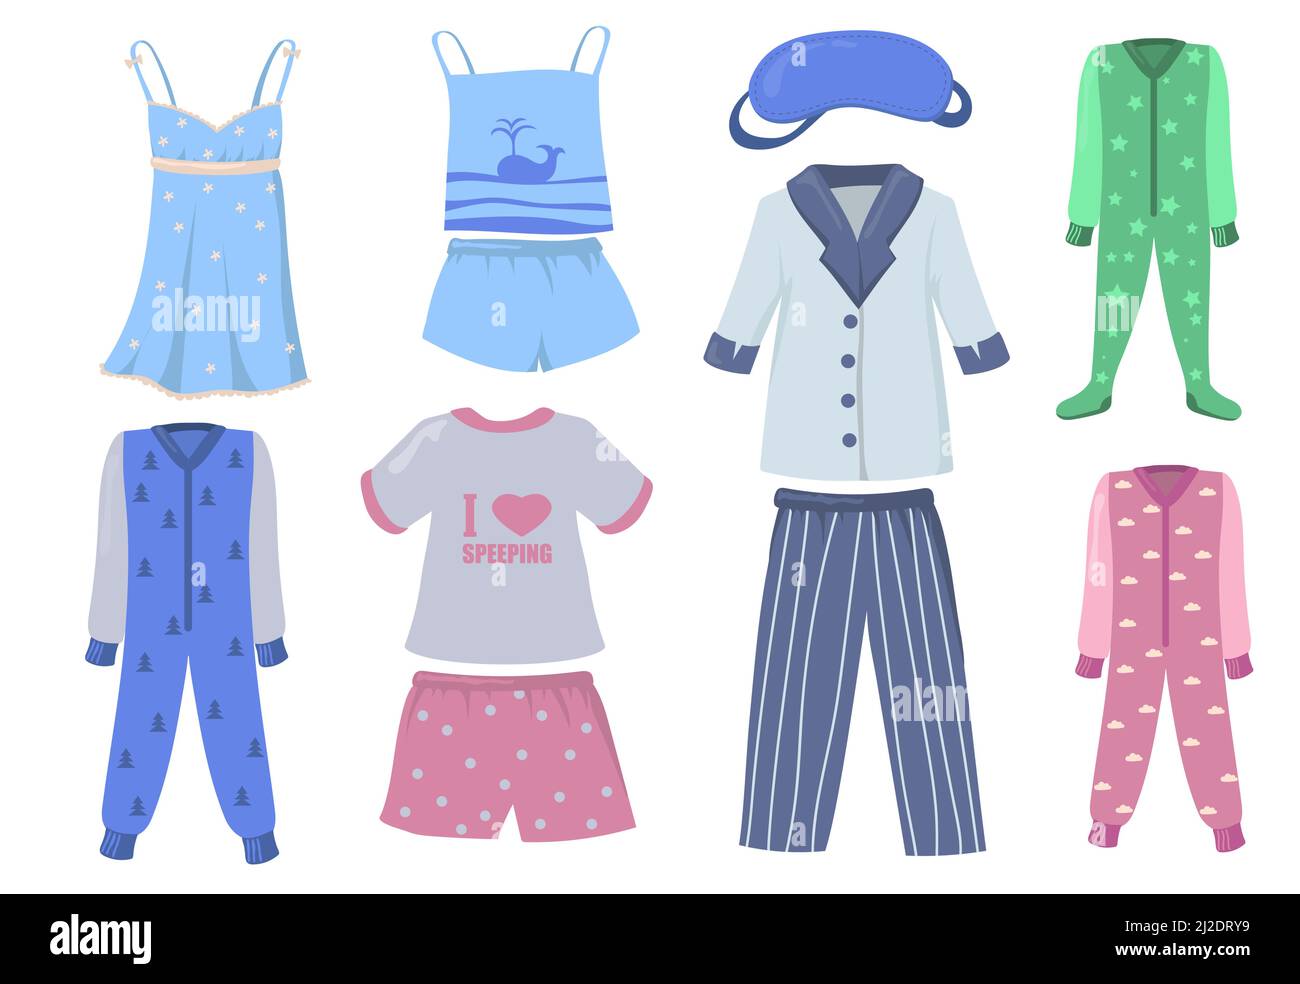 Pajamas for kids and adults set. Shirts and pants or shorts, night wear ...